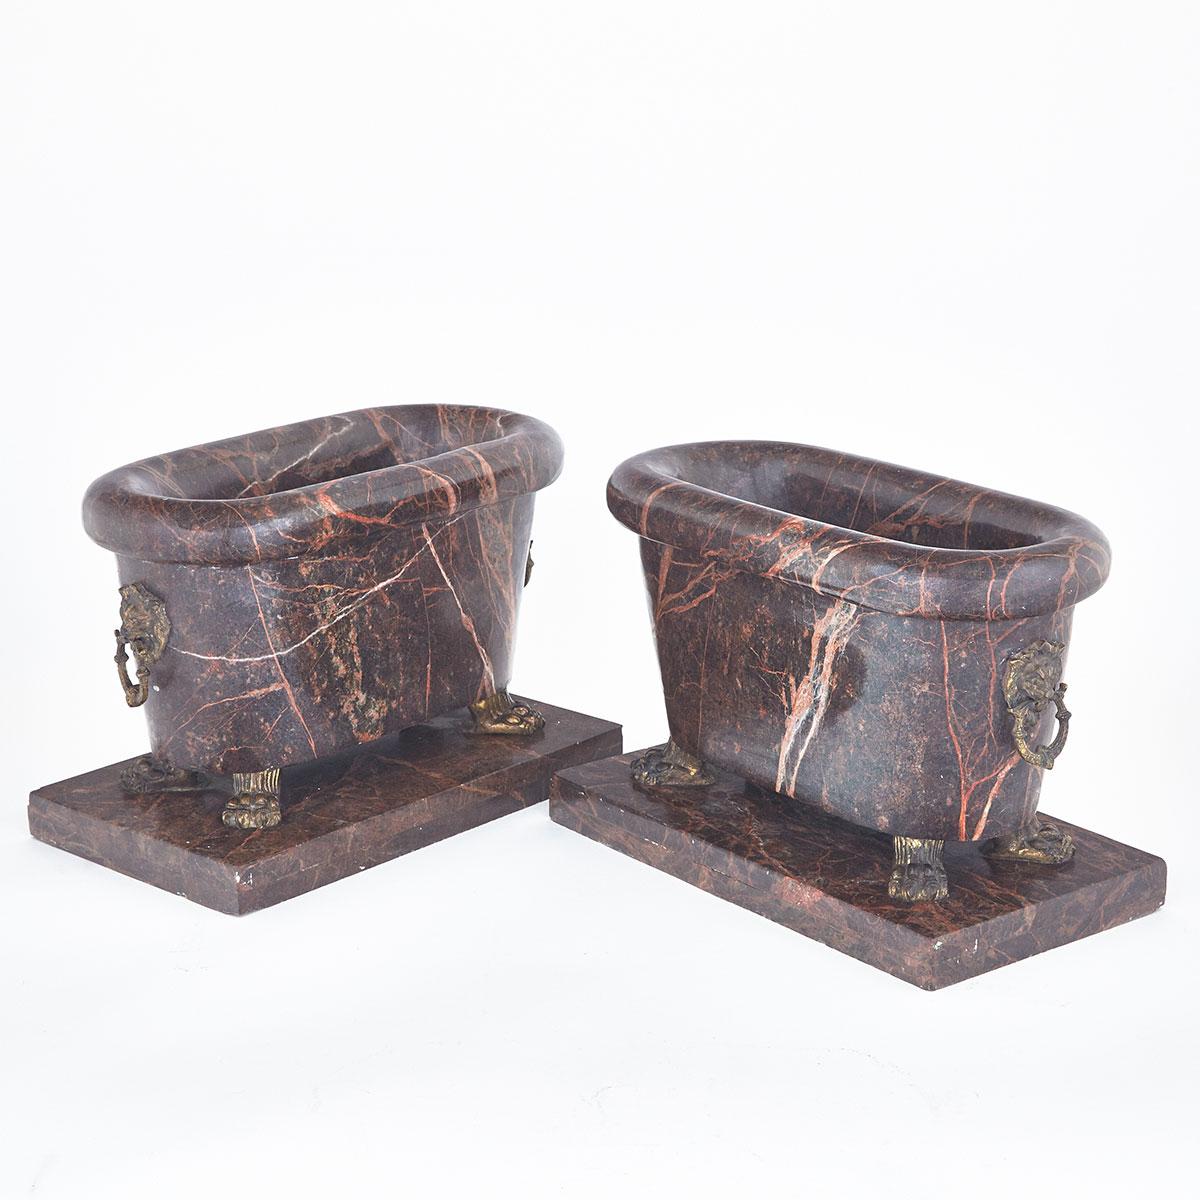 Pair of Italian Ormolu Mounted Red Marble Roman Tub Form Planters, early 20th century